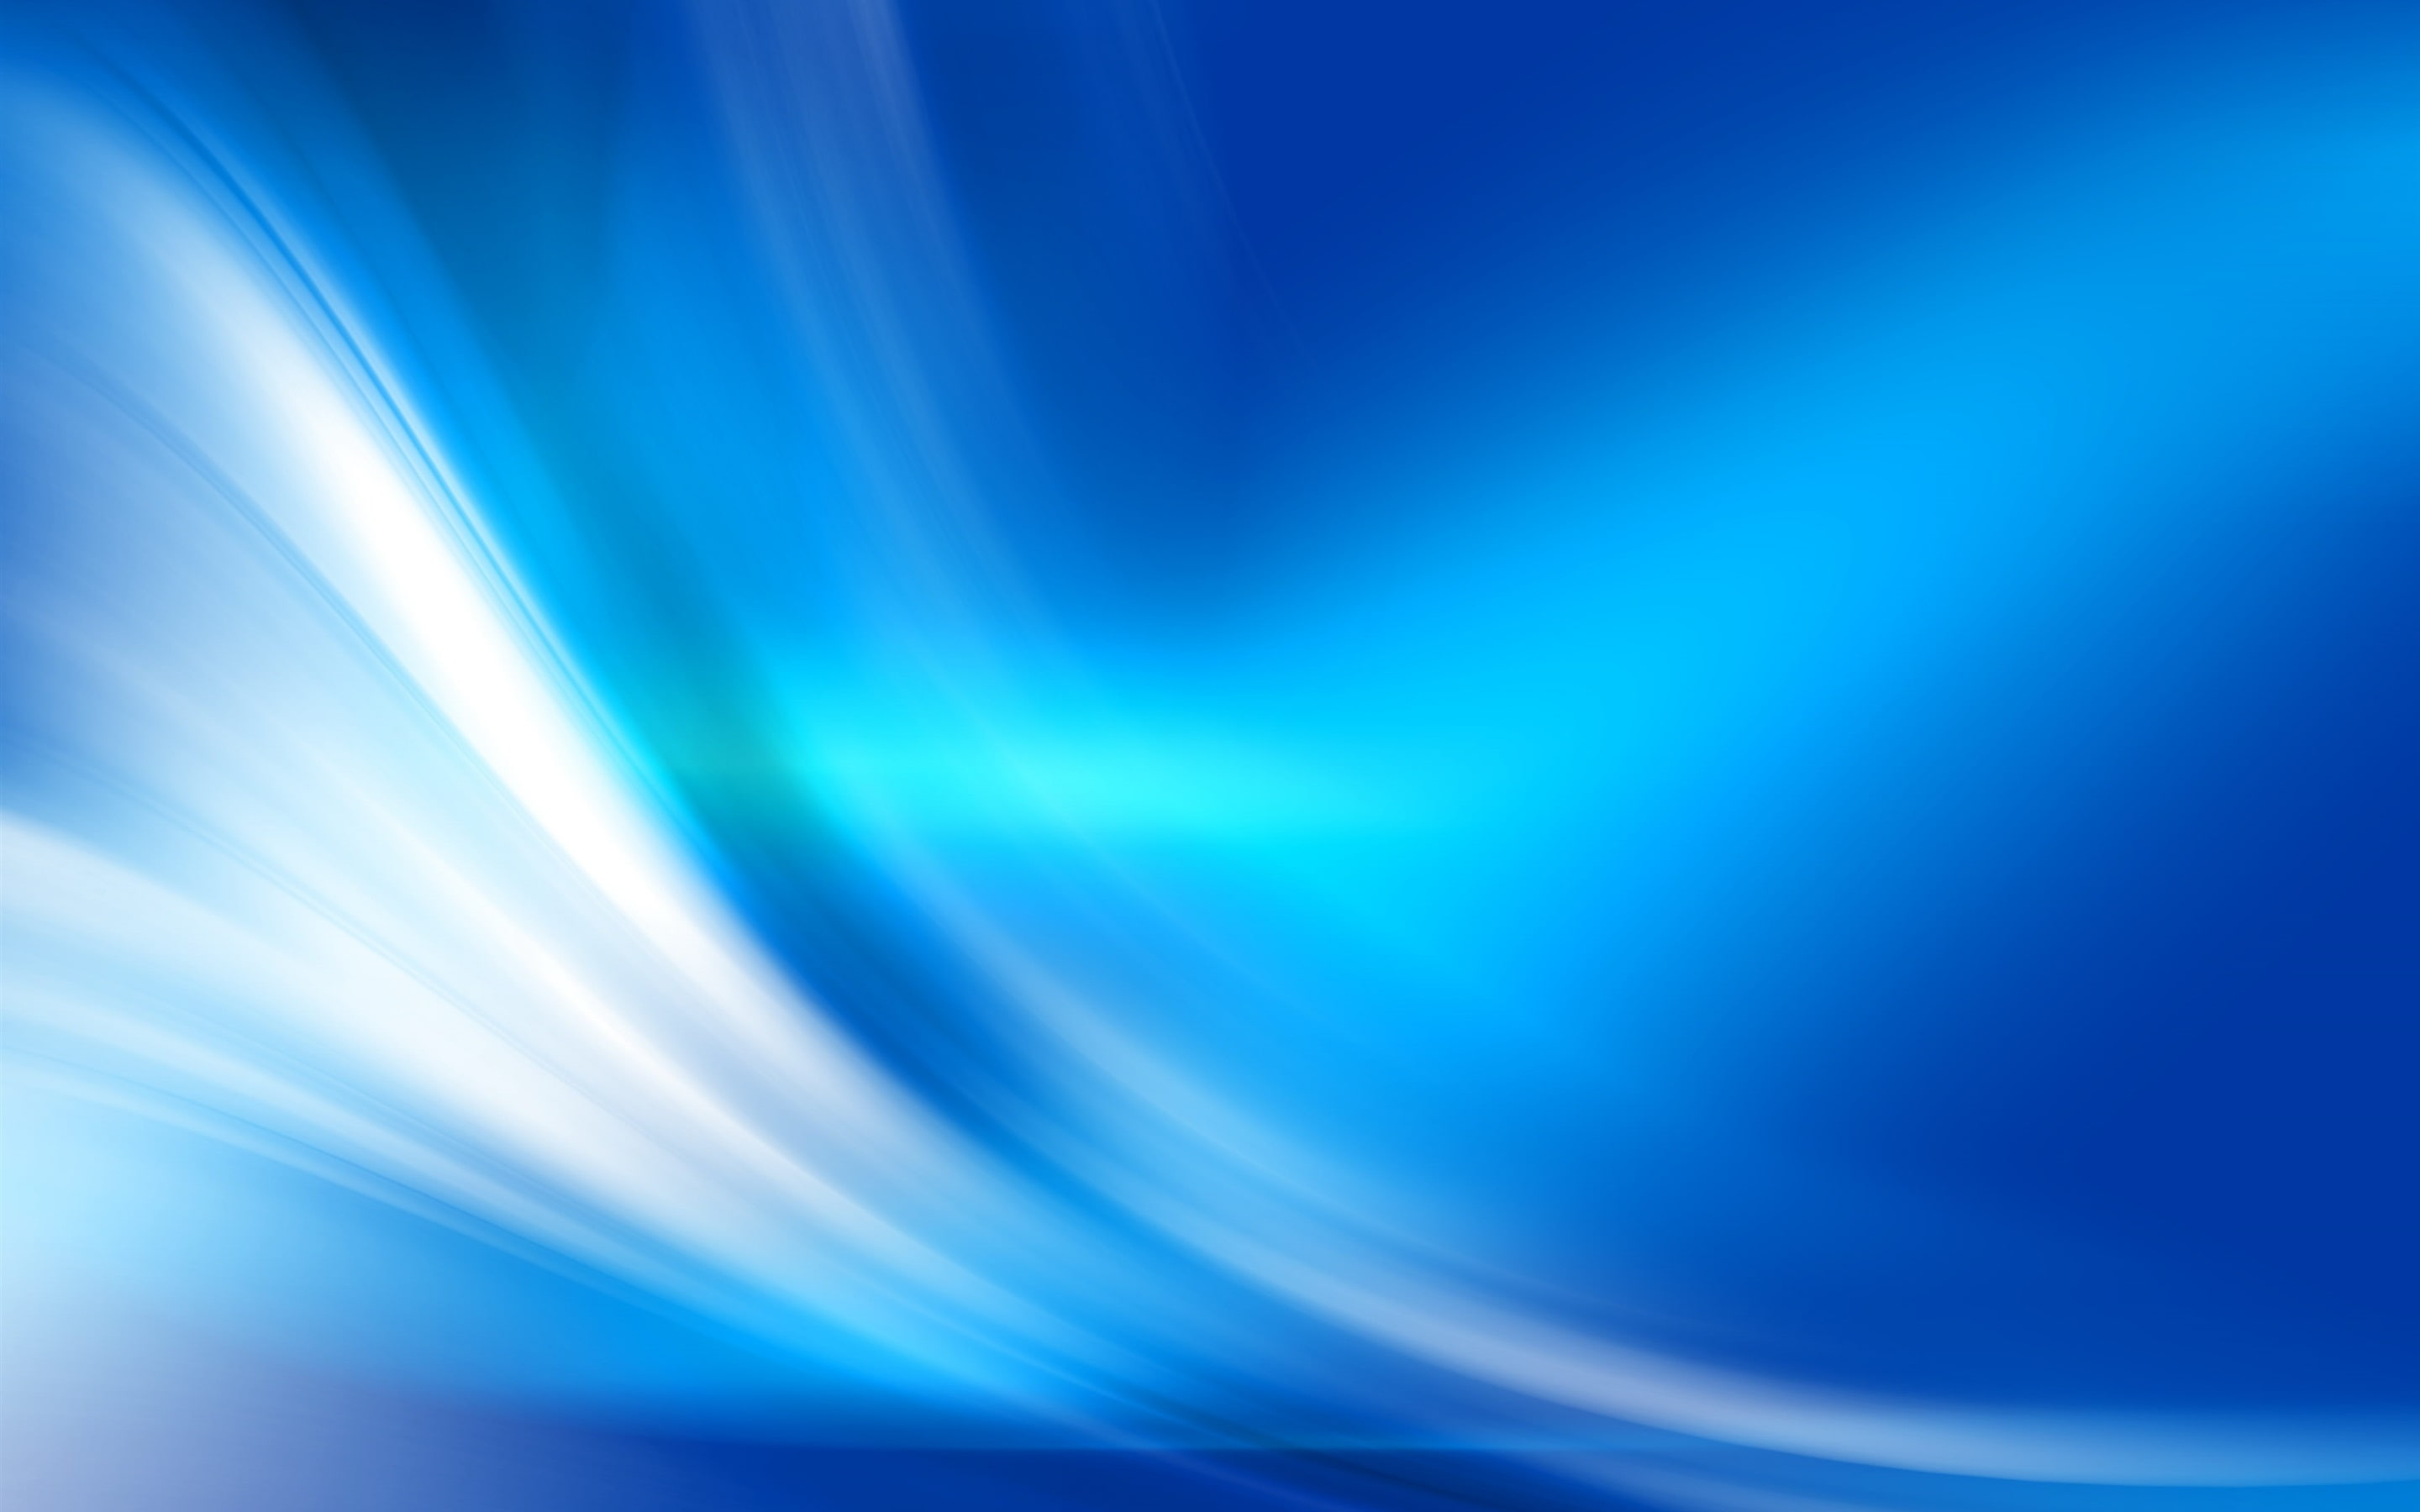 Blue curves, abstract background